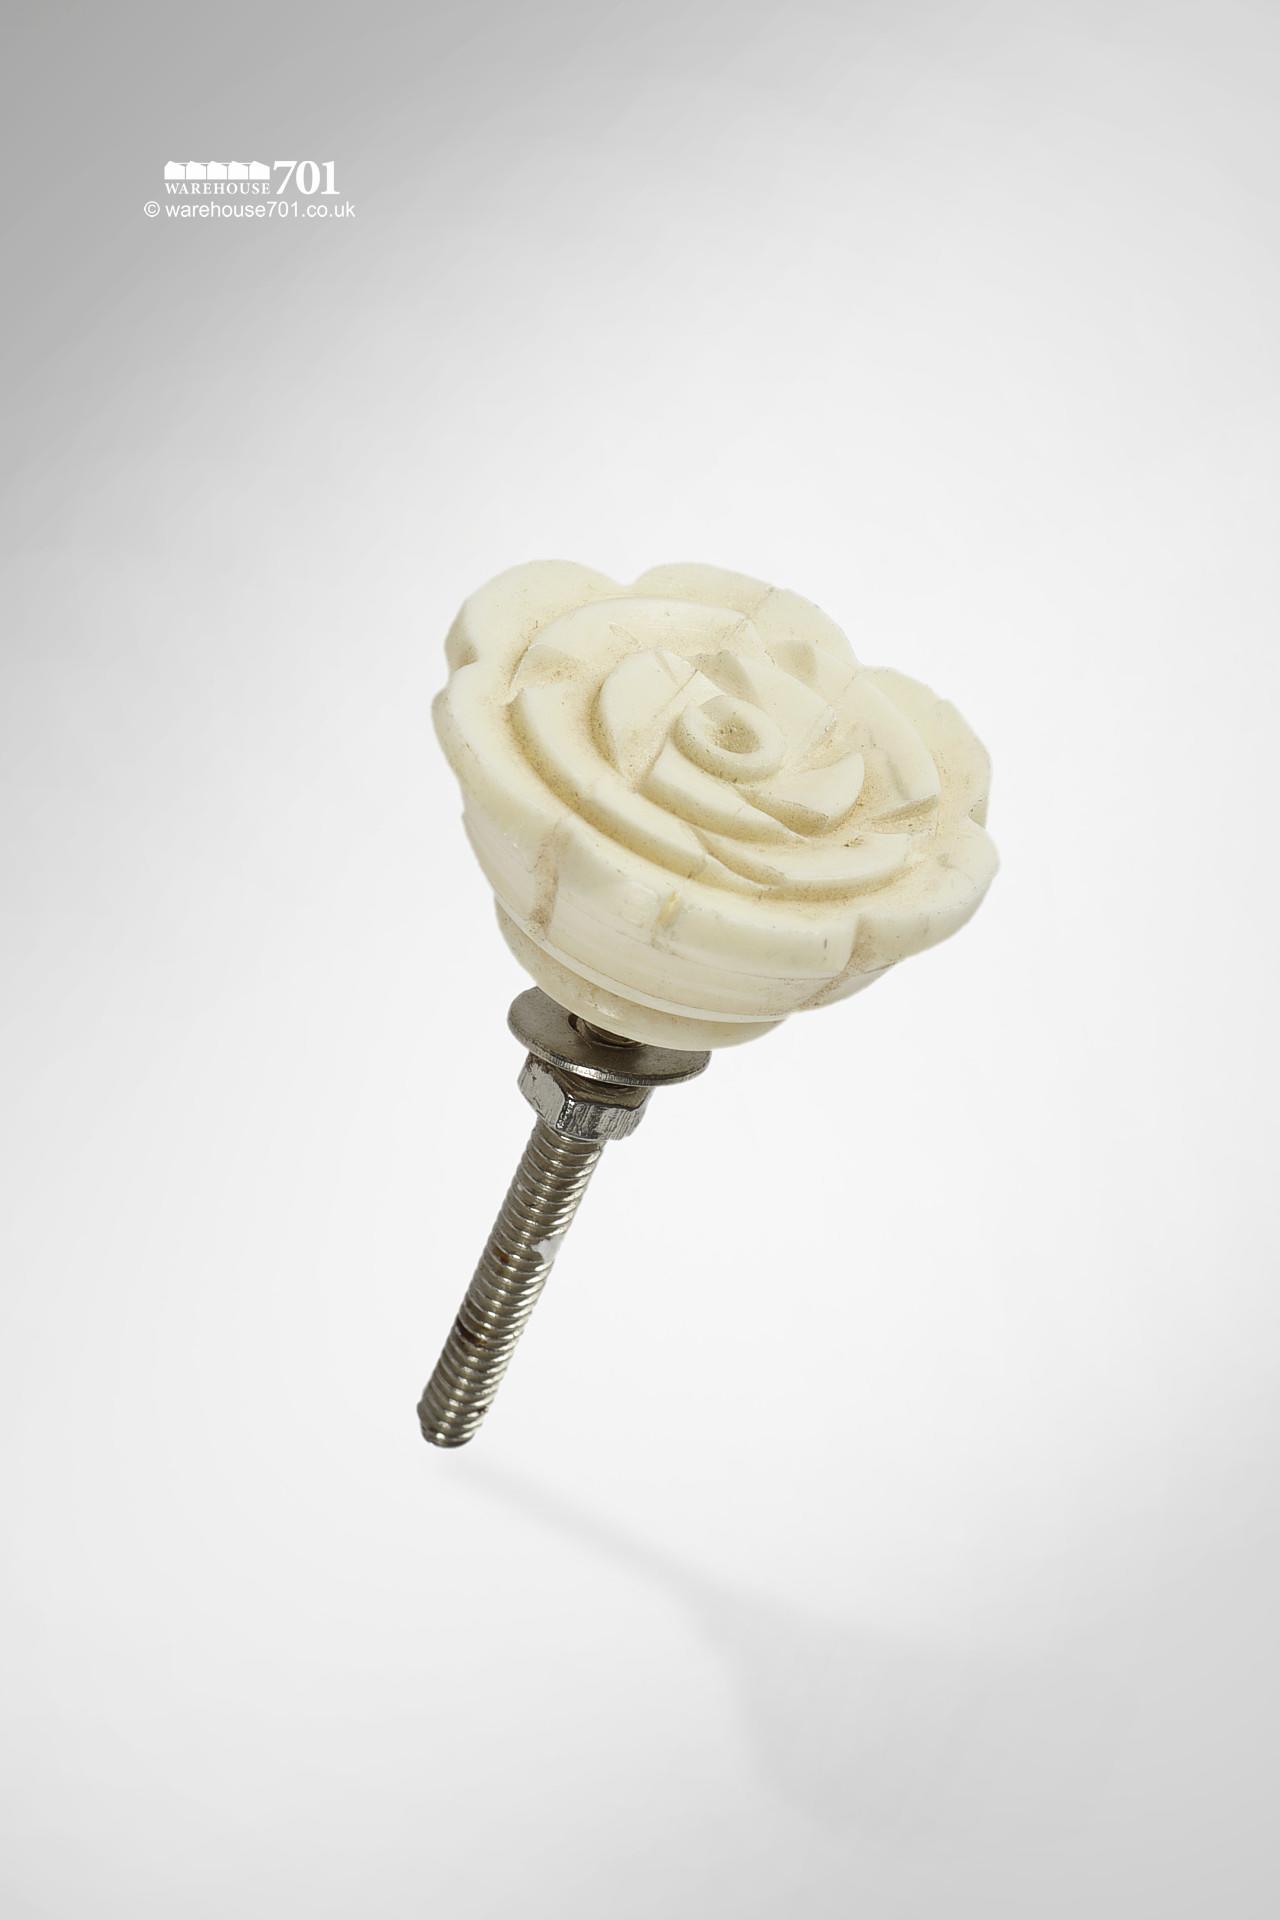 New White Resin Rose or Floral Door, Drawer or Cupboard Knob